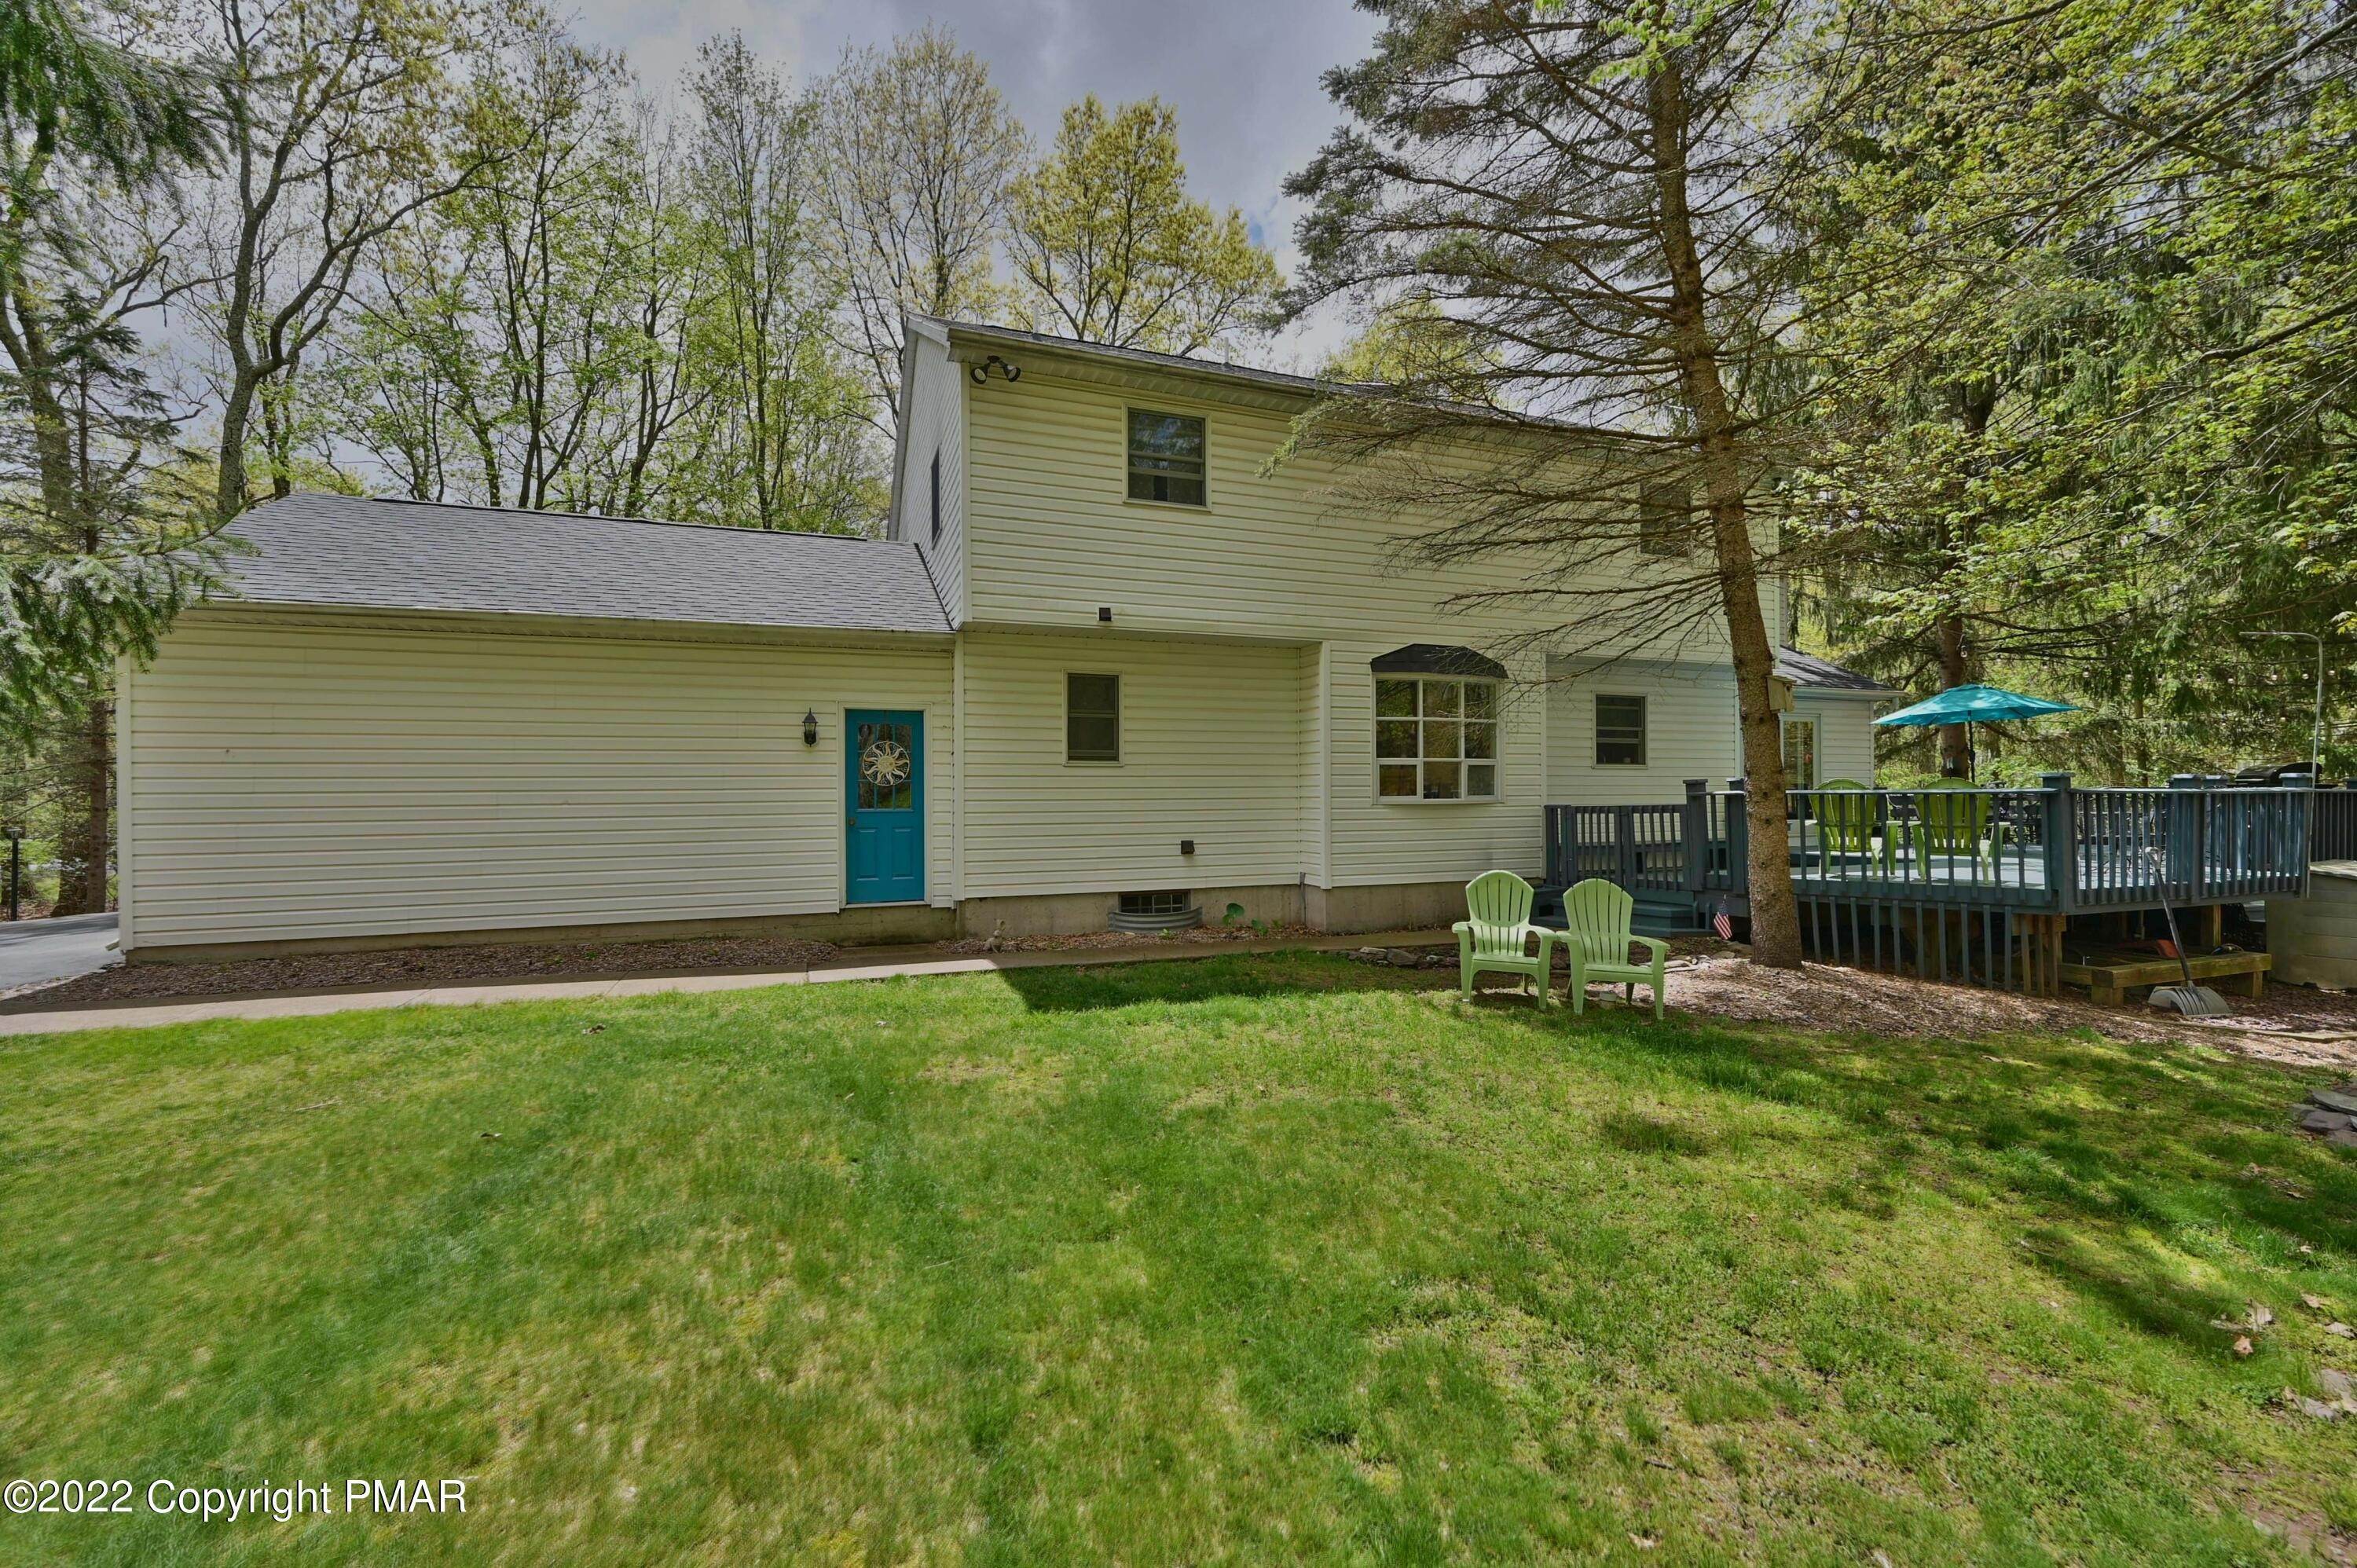 41. Single Family Homes for Sale at 1285 Scotrun Dr Scotrun, Pennsylvania 18355 United States